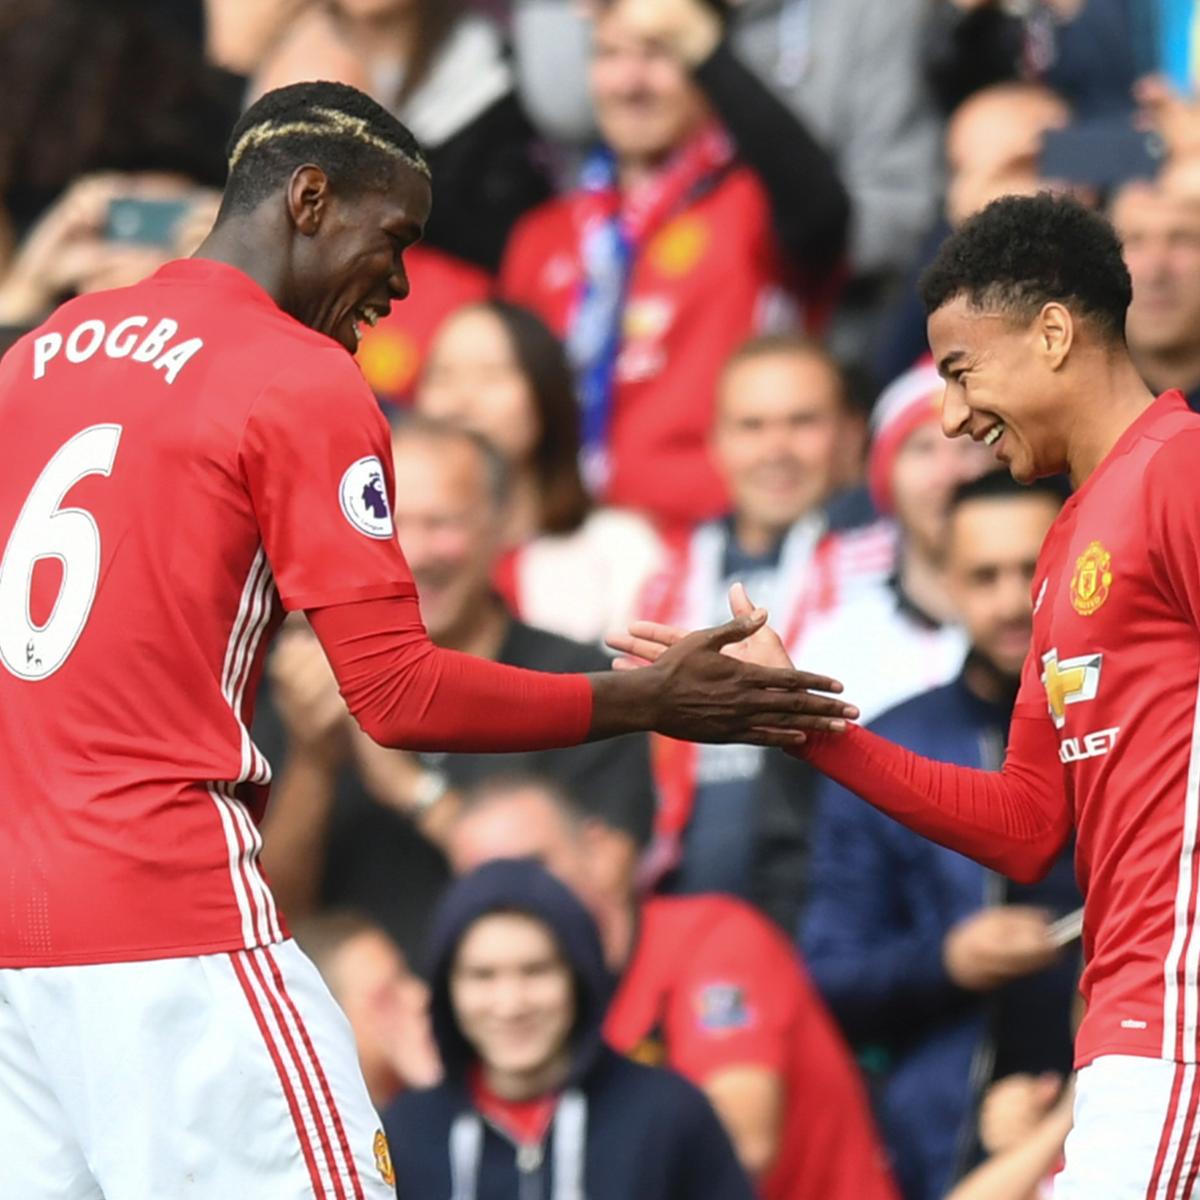 Marcus Rashford and Jesse Lingard work on Pogba-inspired handshake en route  to London (and check out £89m star's 24-carat gold-plated rucksack!)